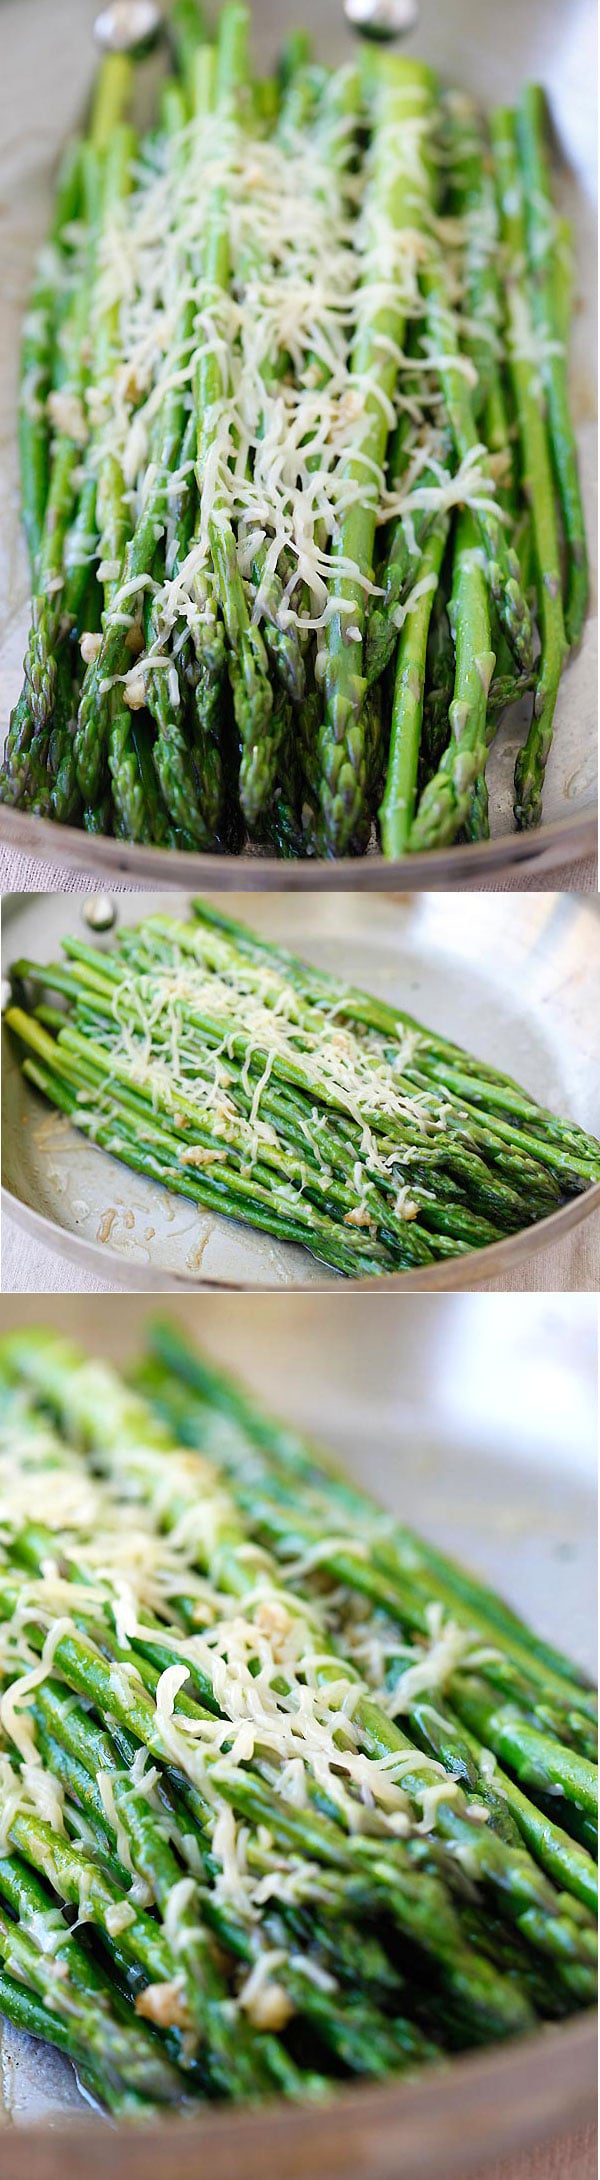 Parmesan Asparagus - easy sauteed asparagus with Parmesan cheese on a skillet. This recipe takes 10 minutes, so healthy and delicious | rasamalaysia.com